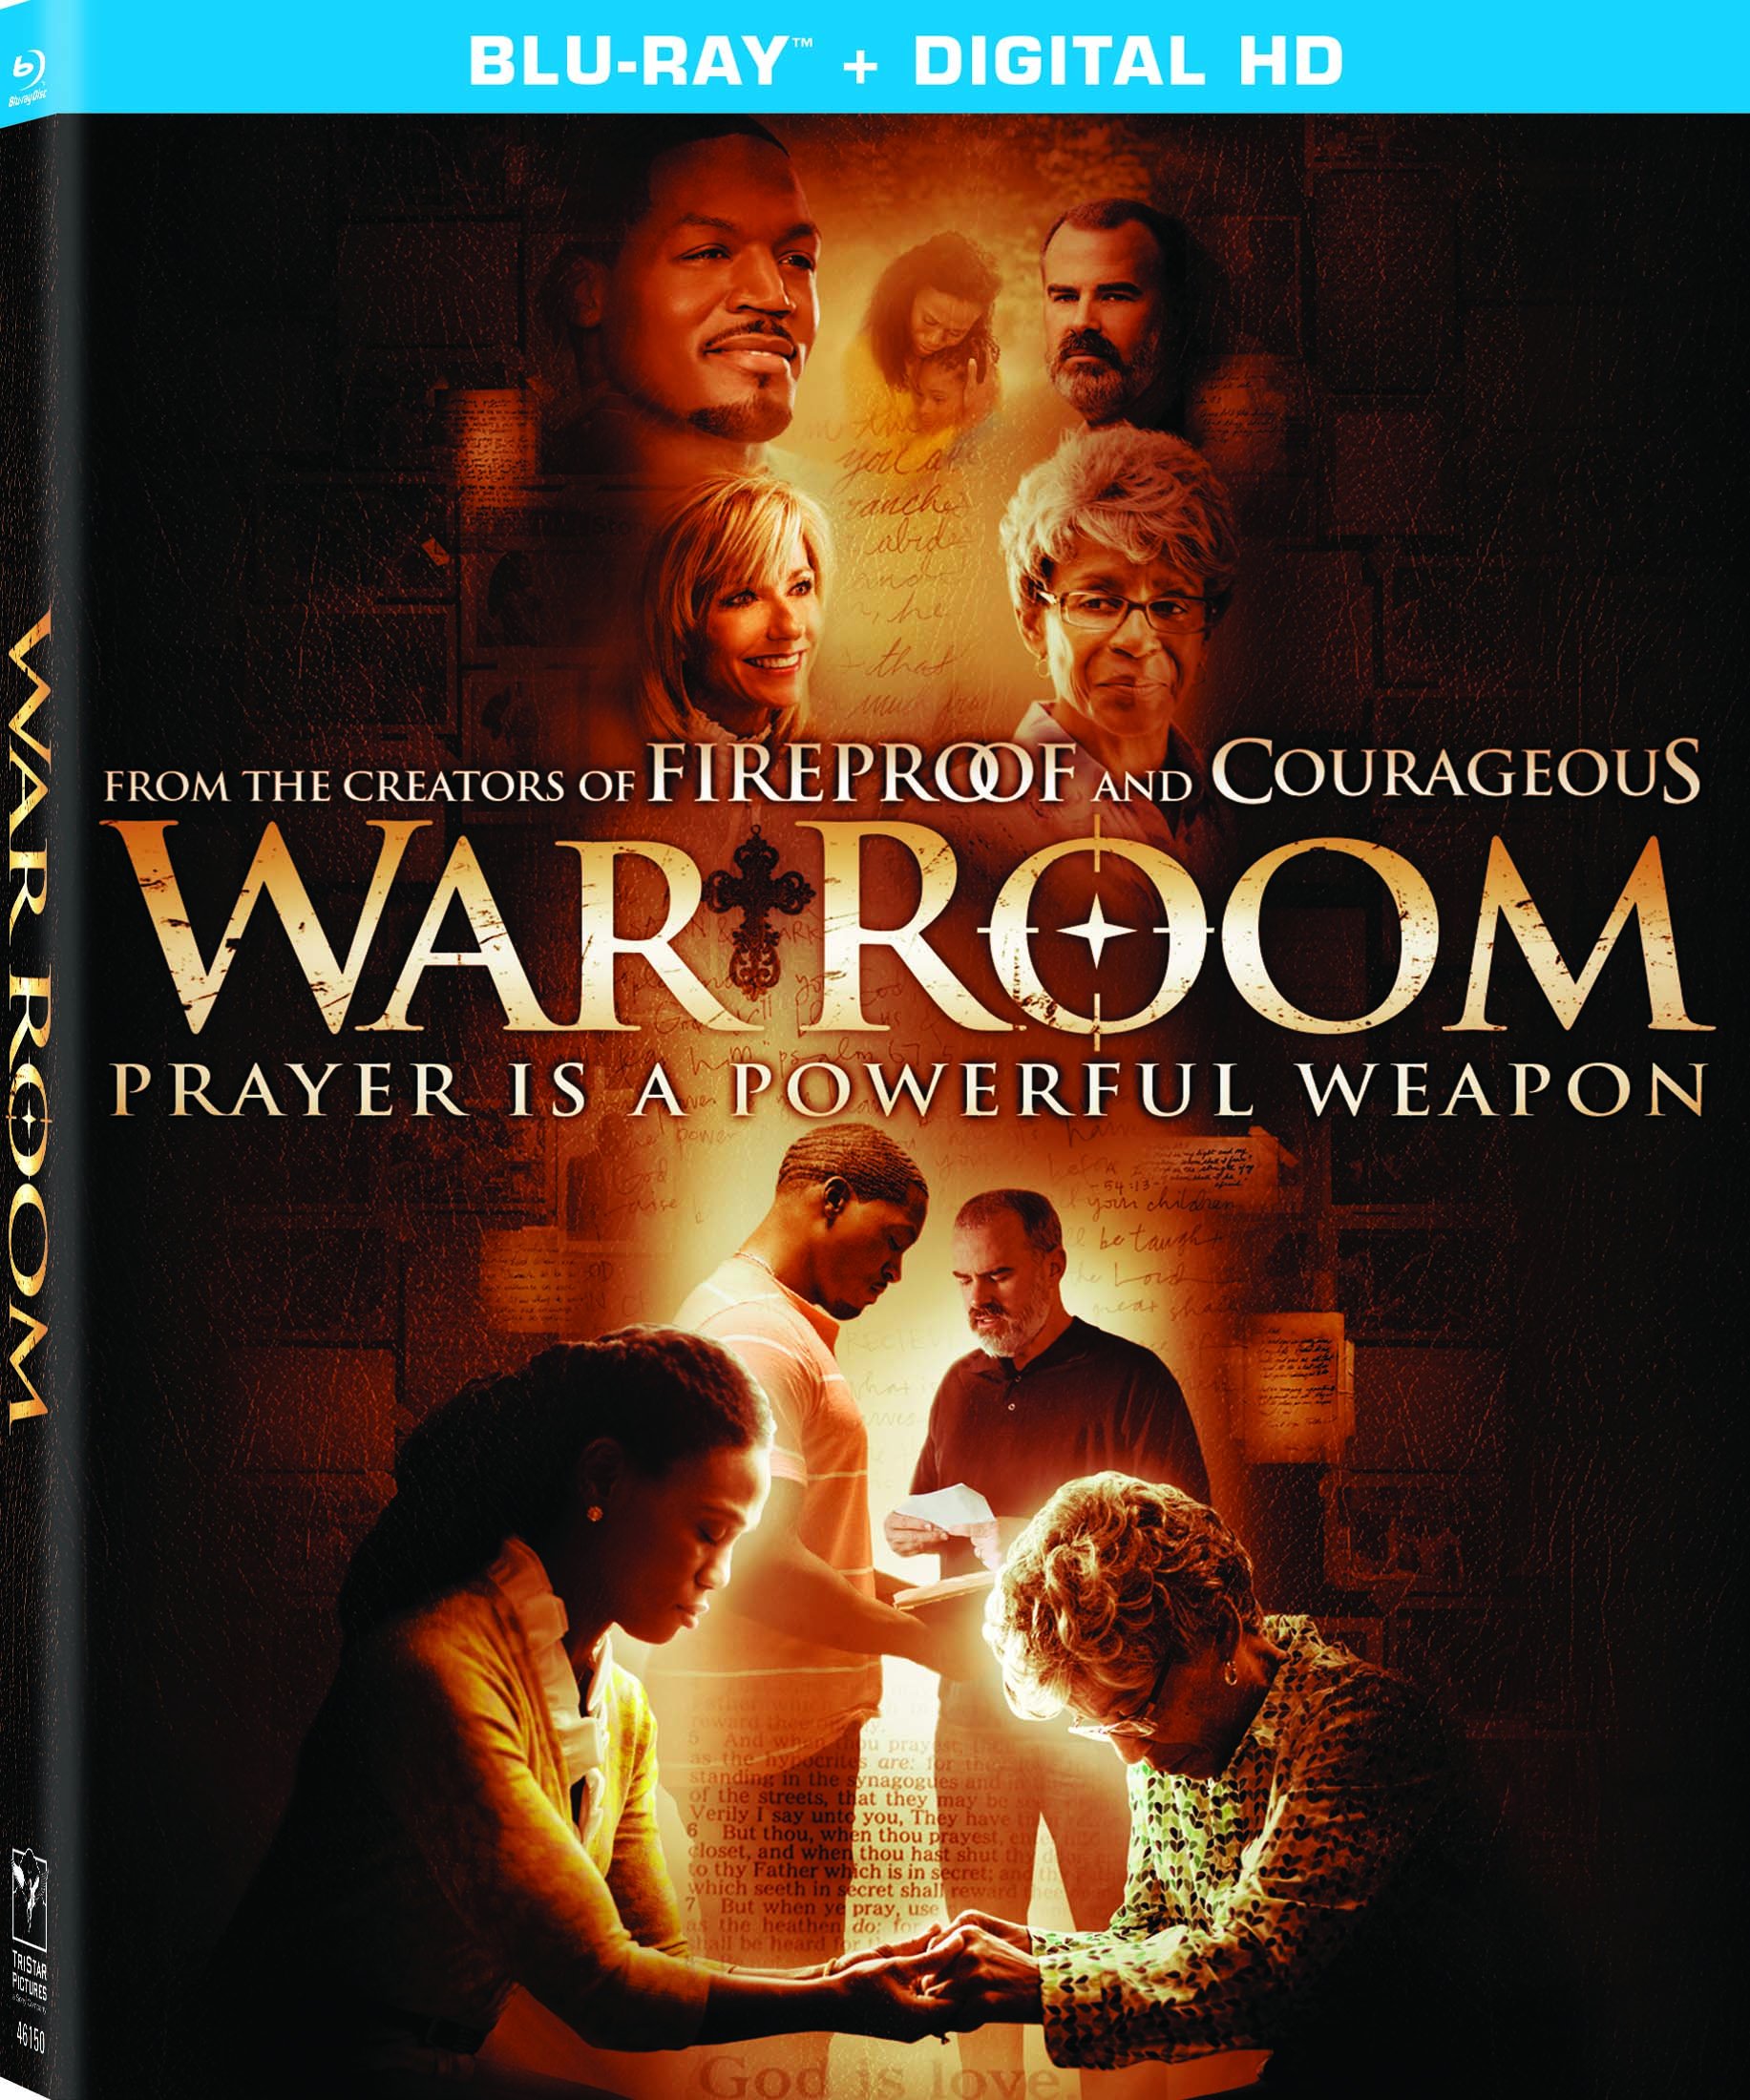 War Room Blu-ray Review